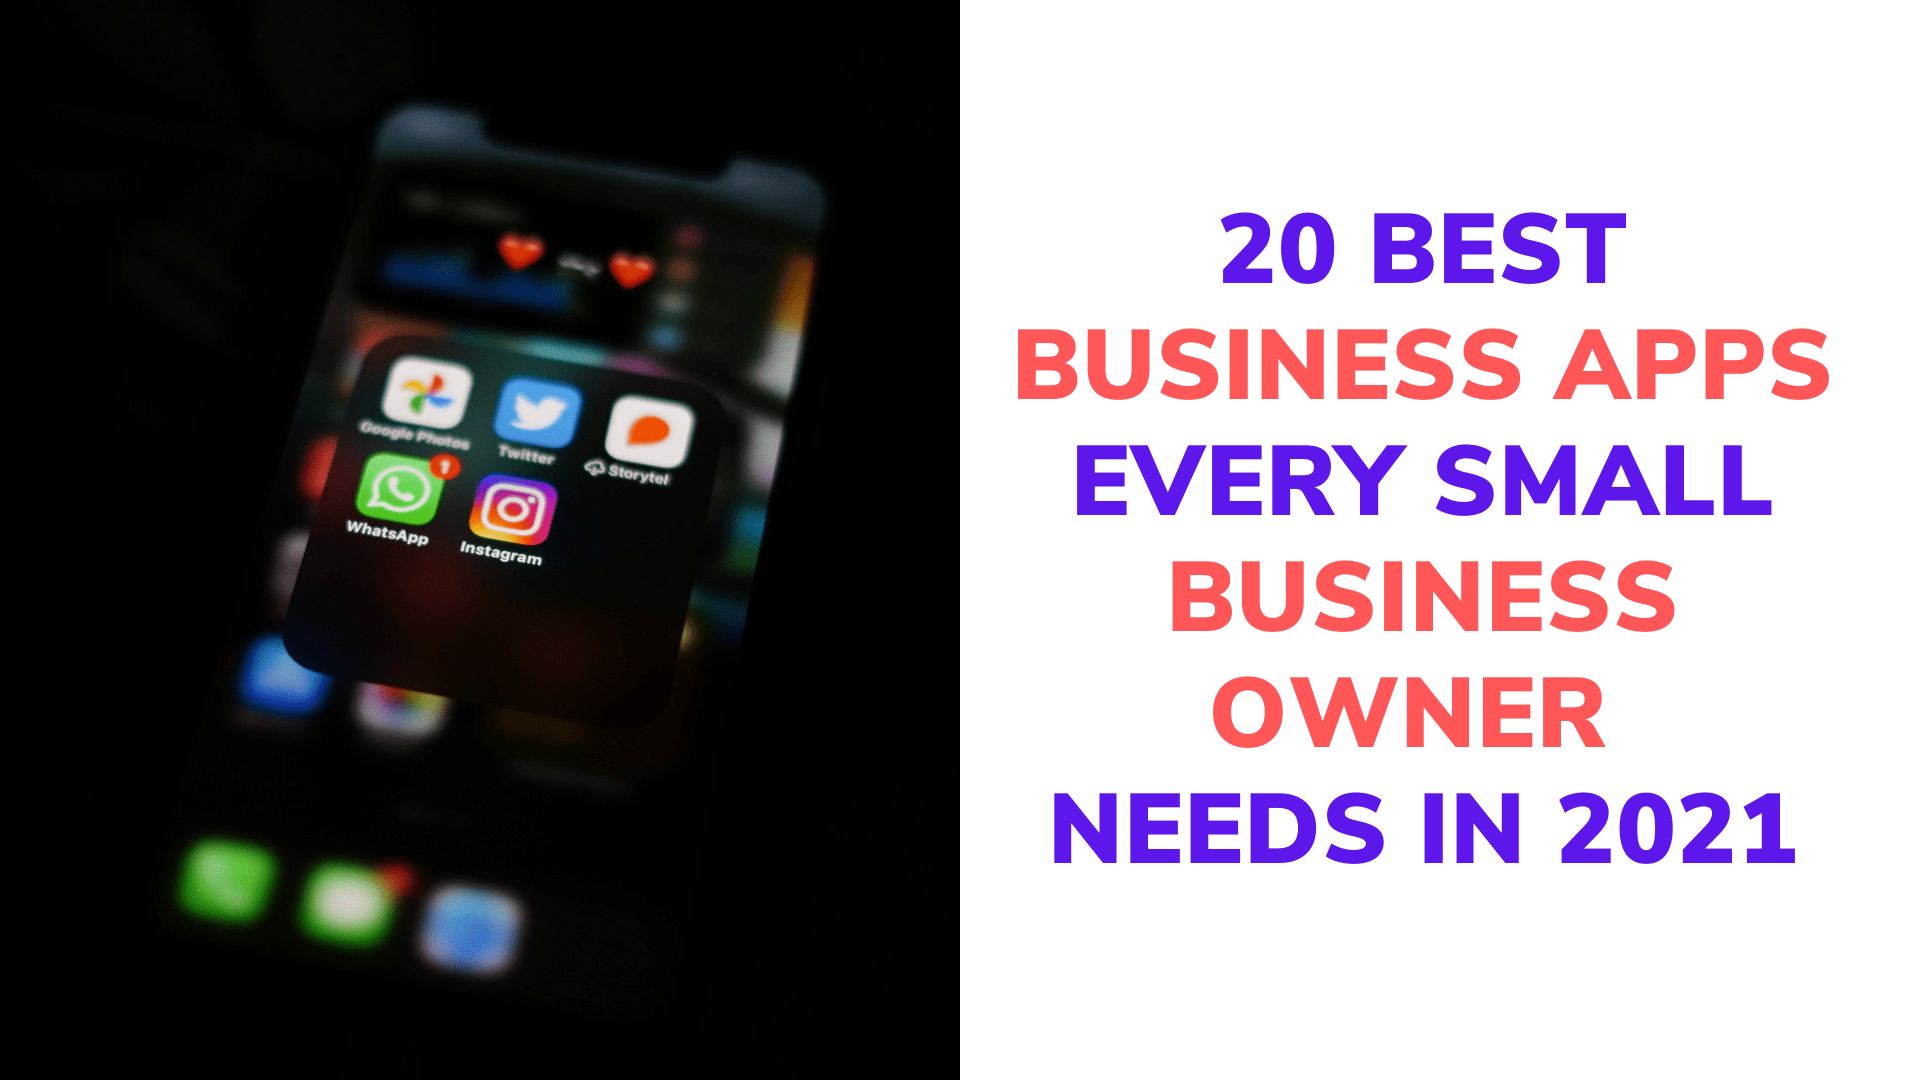 20 Best Business Apps Every Small Business Owner Needs In 2021